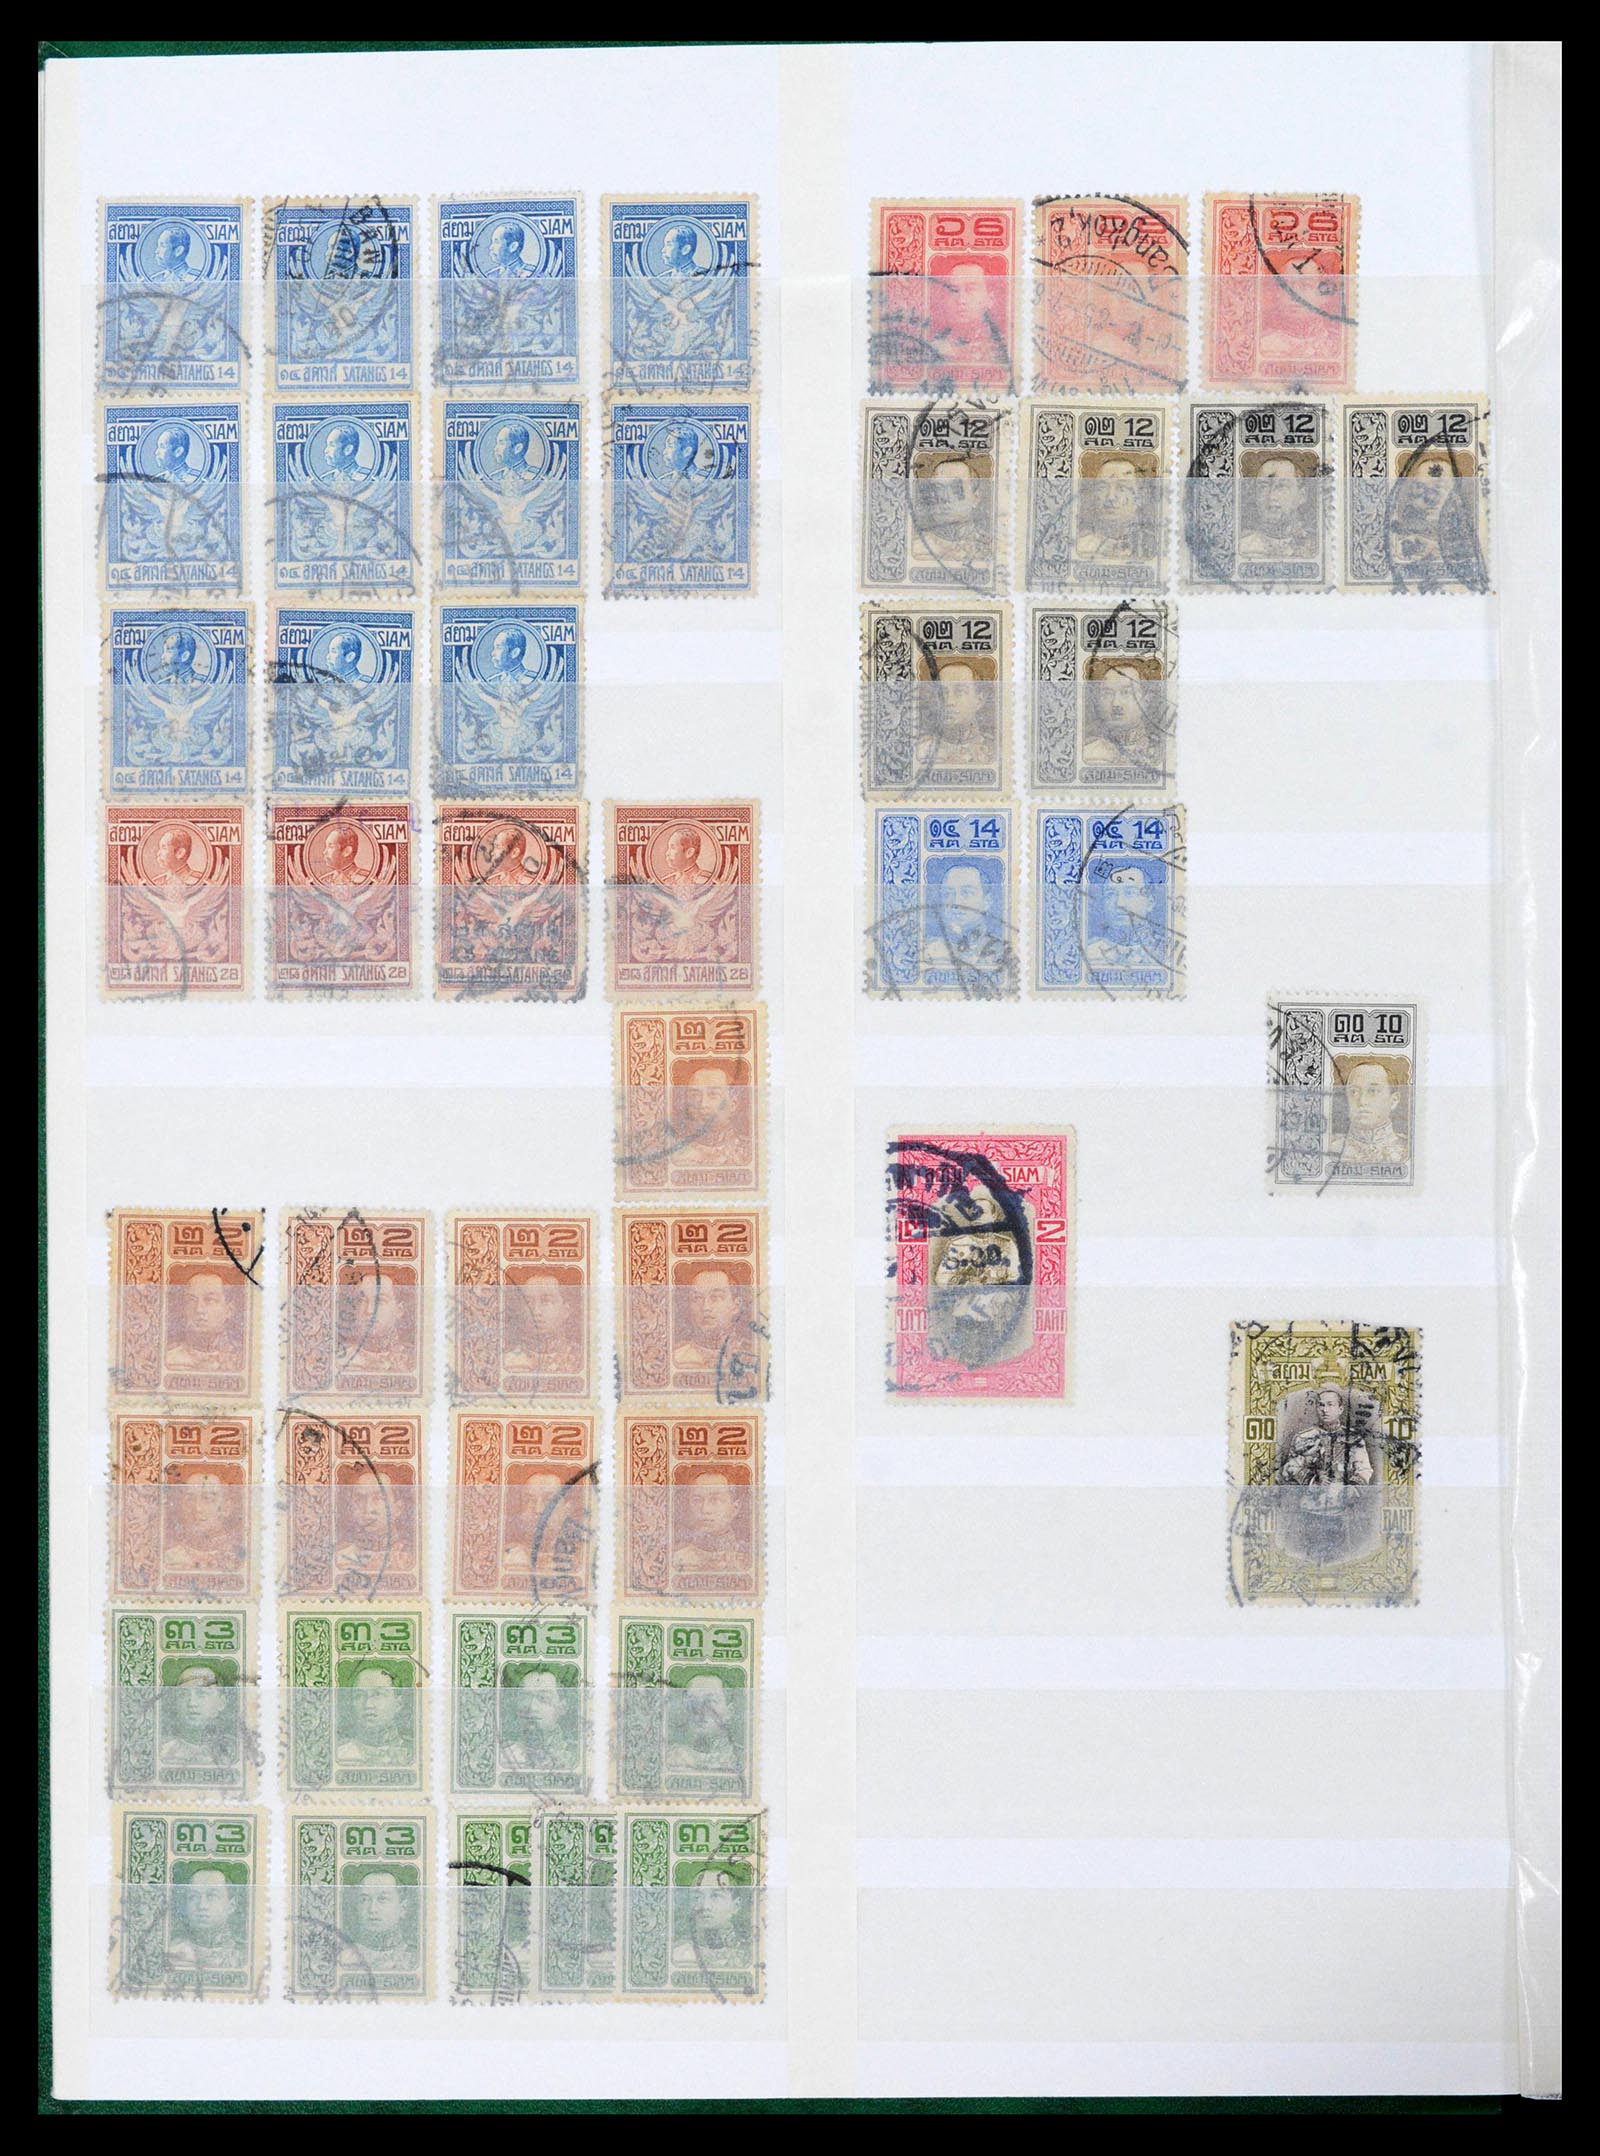 39384 0008 - Stamp collection 39384 Thailand 1883-2014.